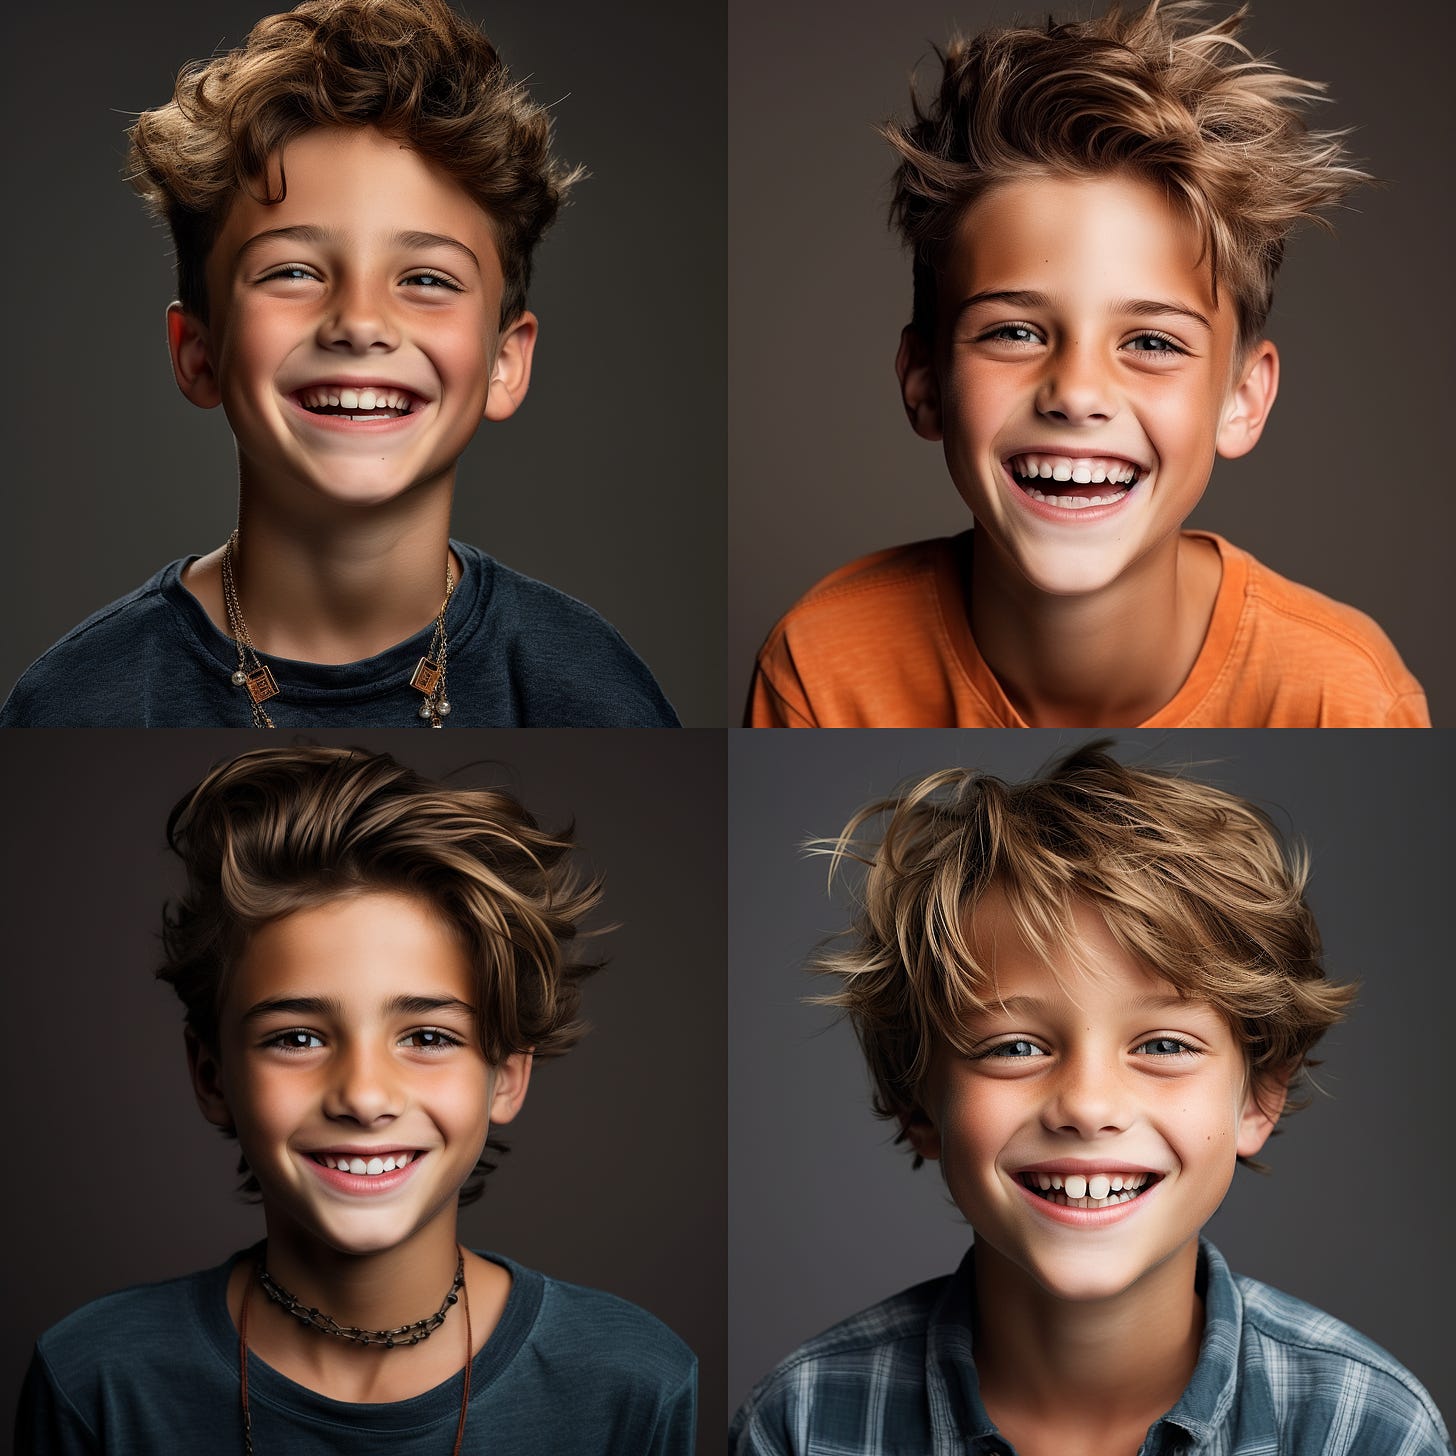 Four-image grid of smiling boy portraits without hats